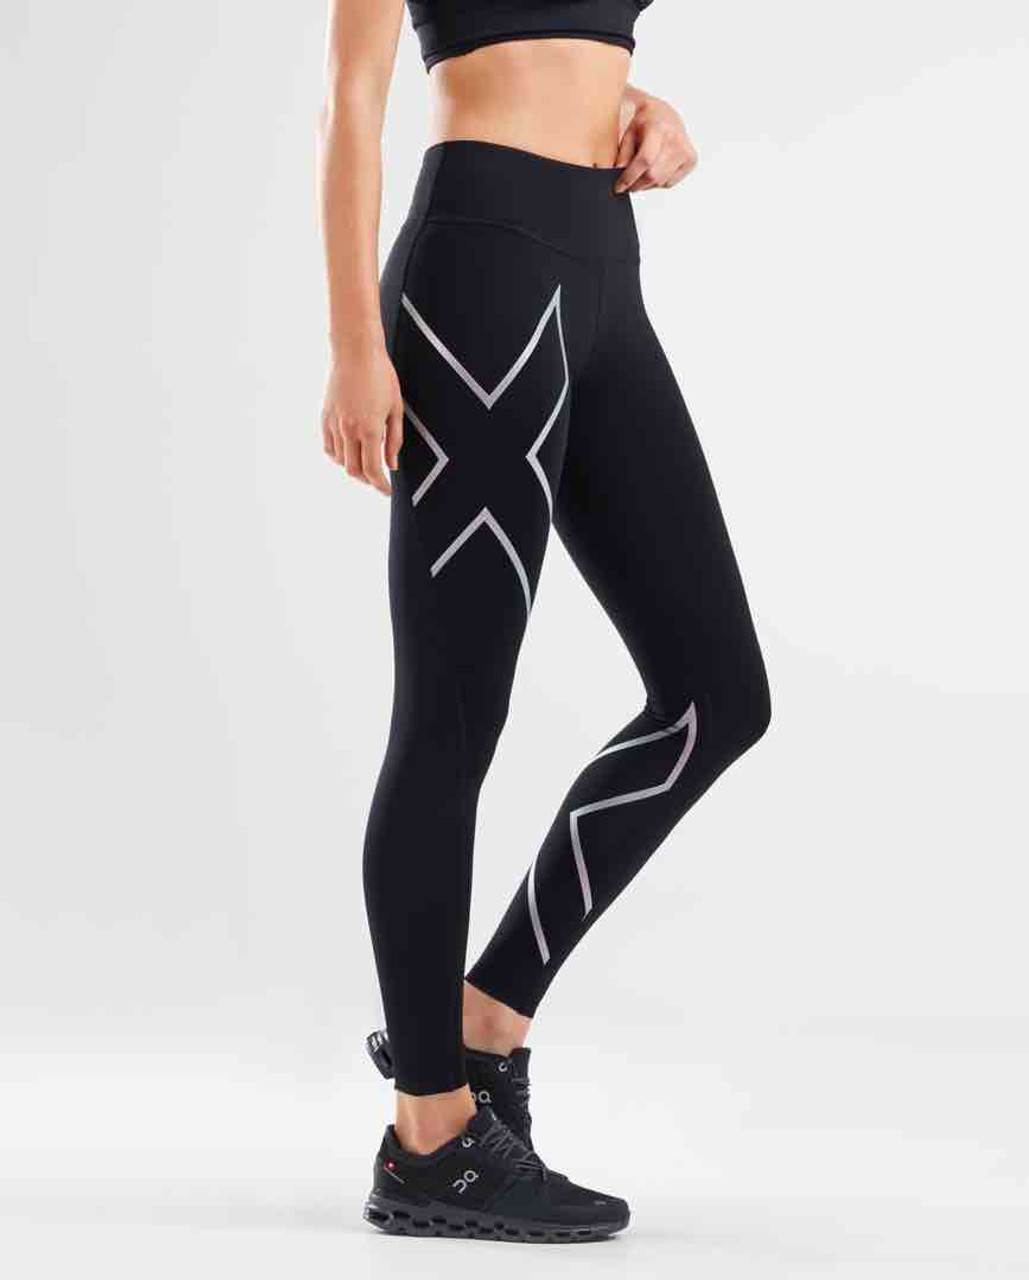 M&S expands sportswear brand Goodmove as activewear sales soar